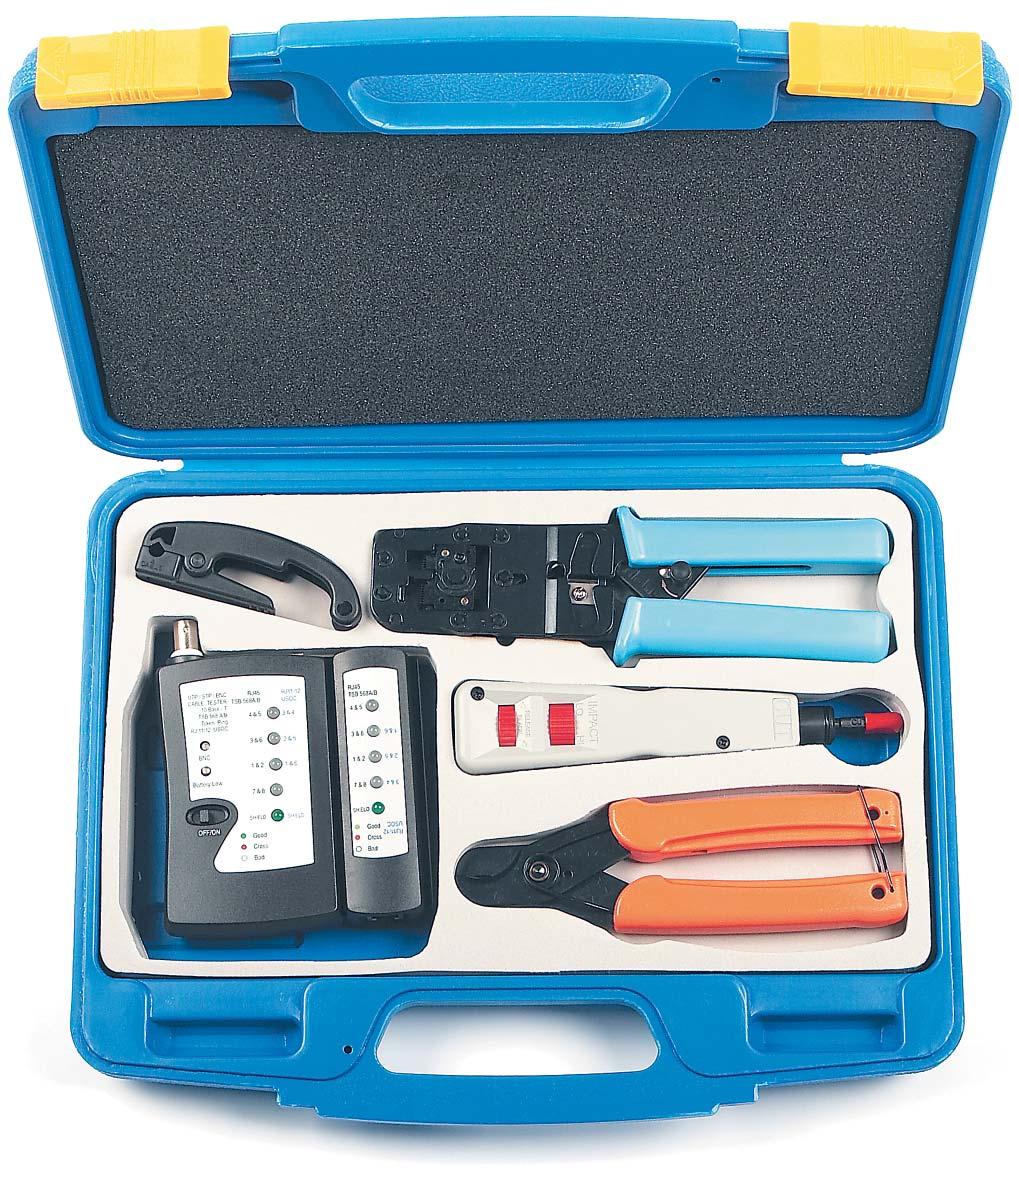 207 Tool Kit HL-NTK110 Ordering information Crimping tool for RJ-45, RJ-12 Cable stripper Cable cutter Impact punch down tool, 110 type Twisted pair tester HL-NTK110 HYPERLINE Tool kit (crimping tool